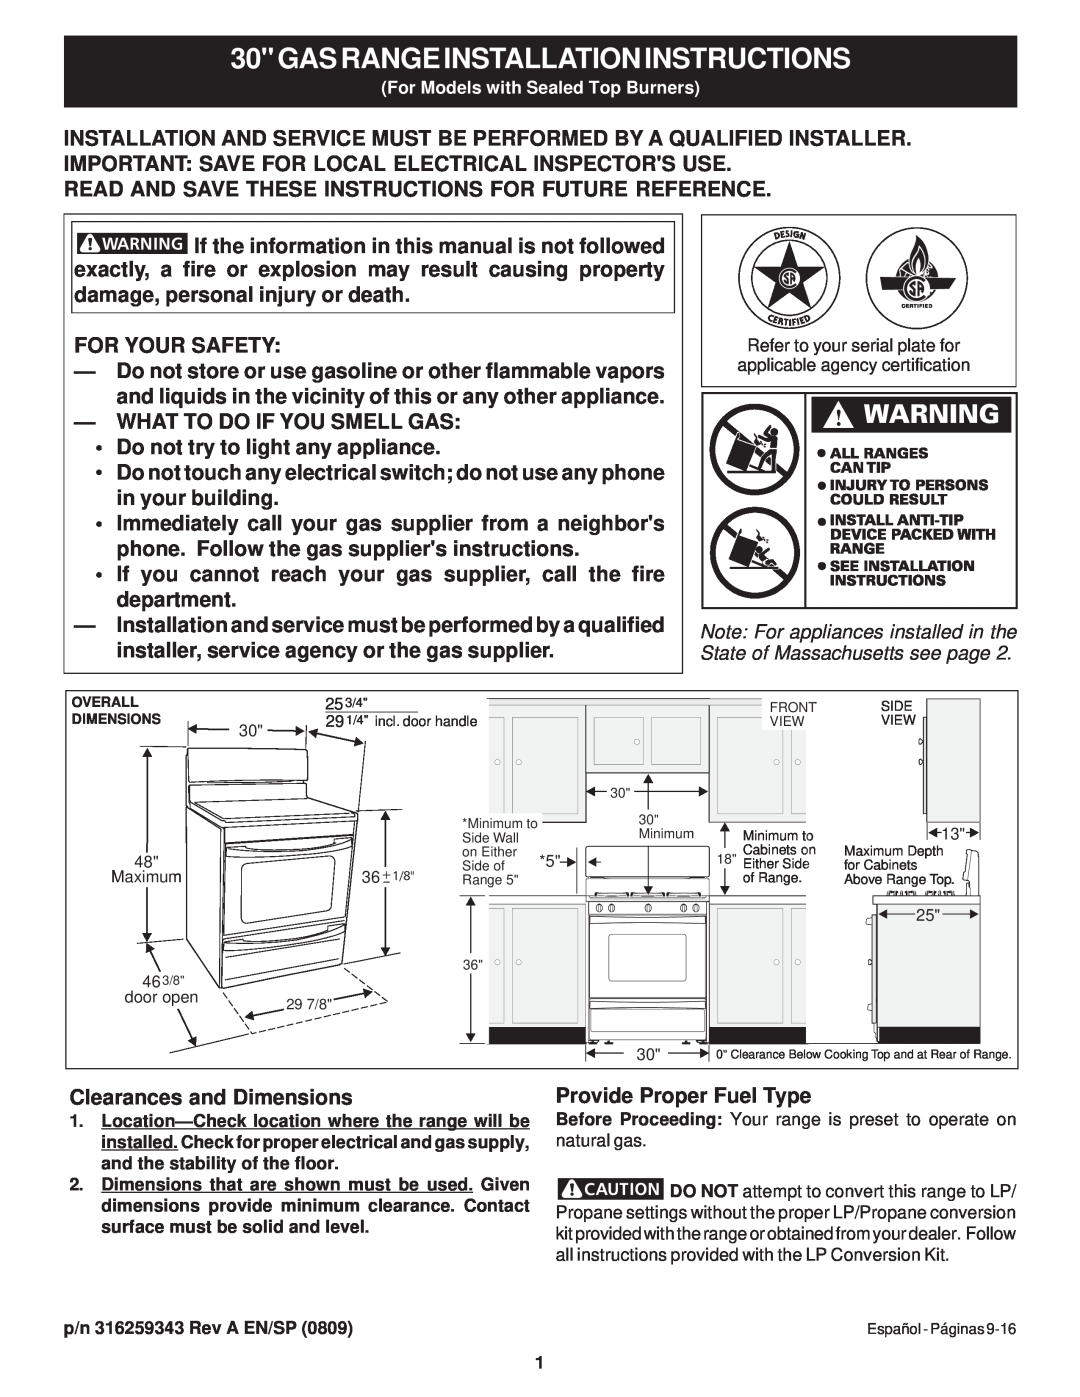 Frigidaire 316259343 dimensions 30GASRANGEINSTALLATIONINSTRUCTIONS, Read And Save These Instructions For Future Reference 